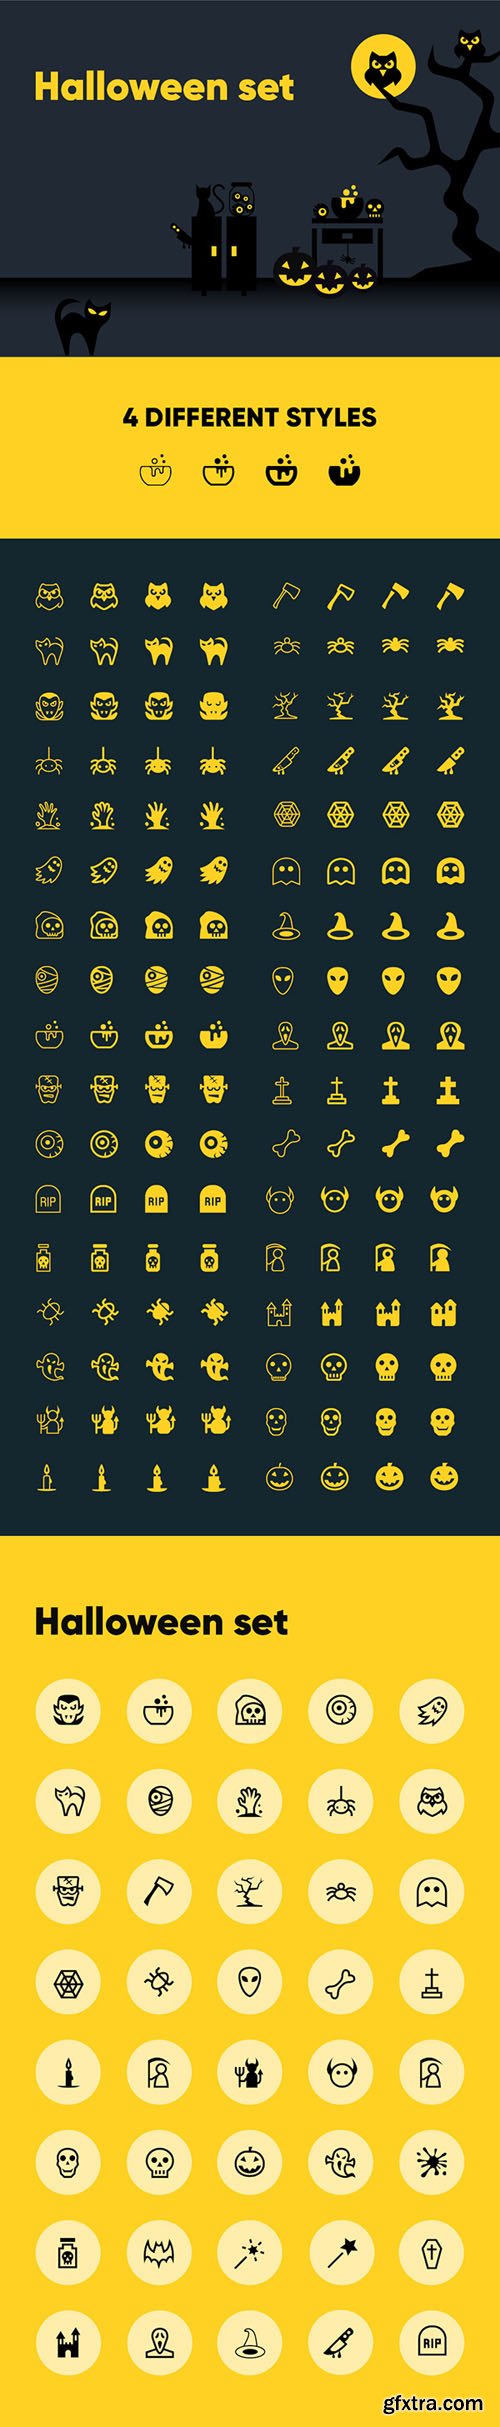 SVG, PNG Vector Icons - Spooky Halloween 2017